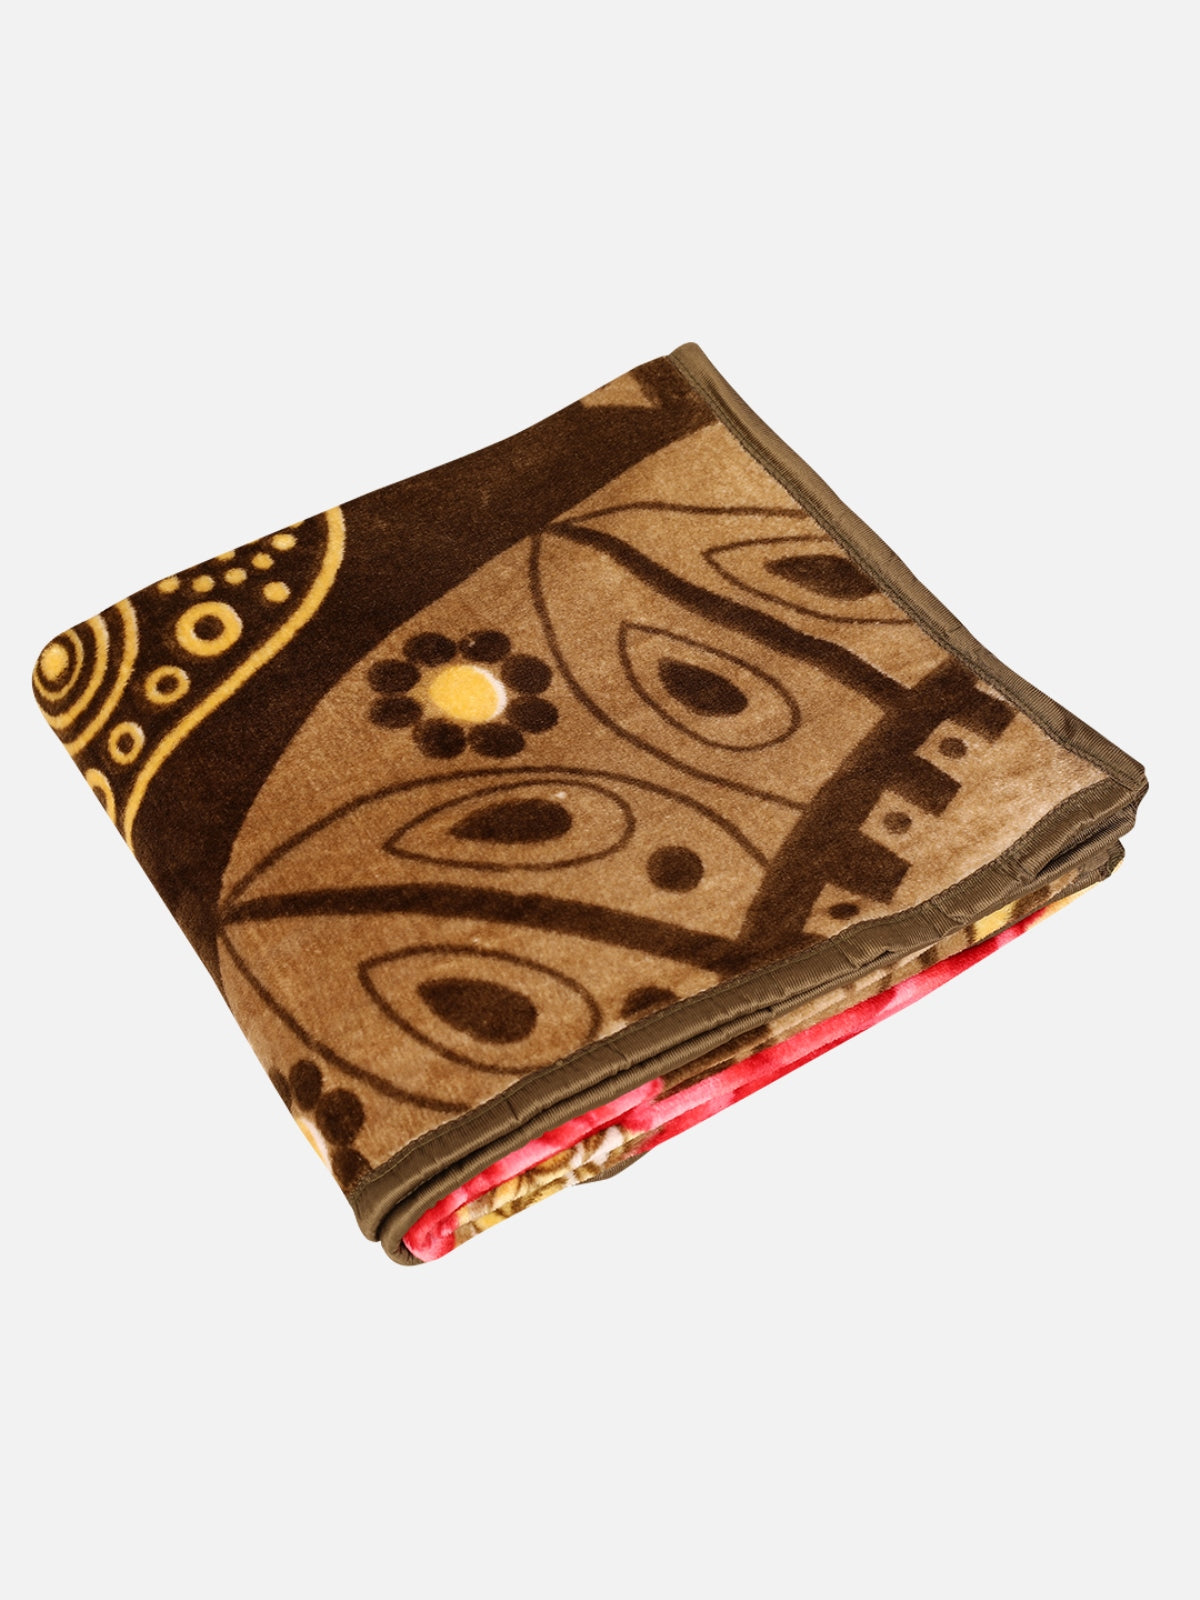 Cream & Brown Rose Patterned 200 GSM Double Bed Blanket